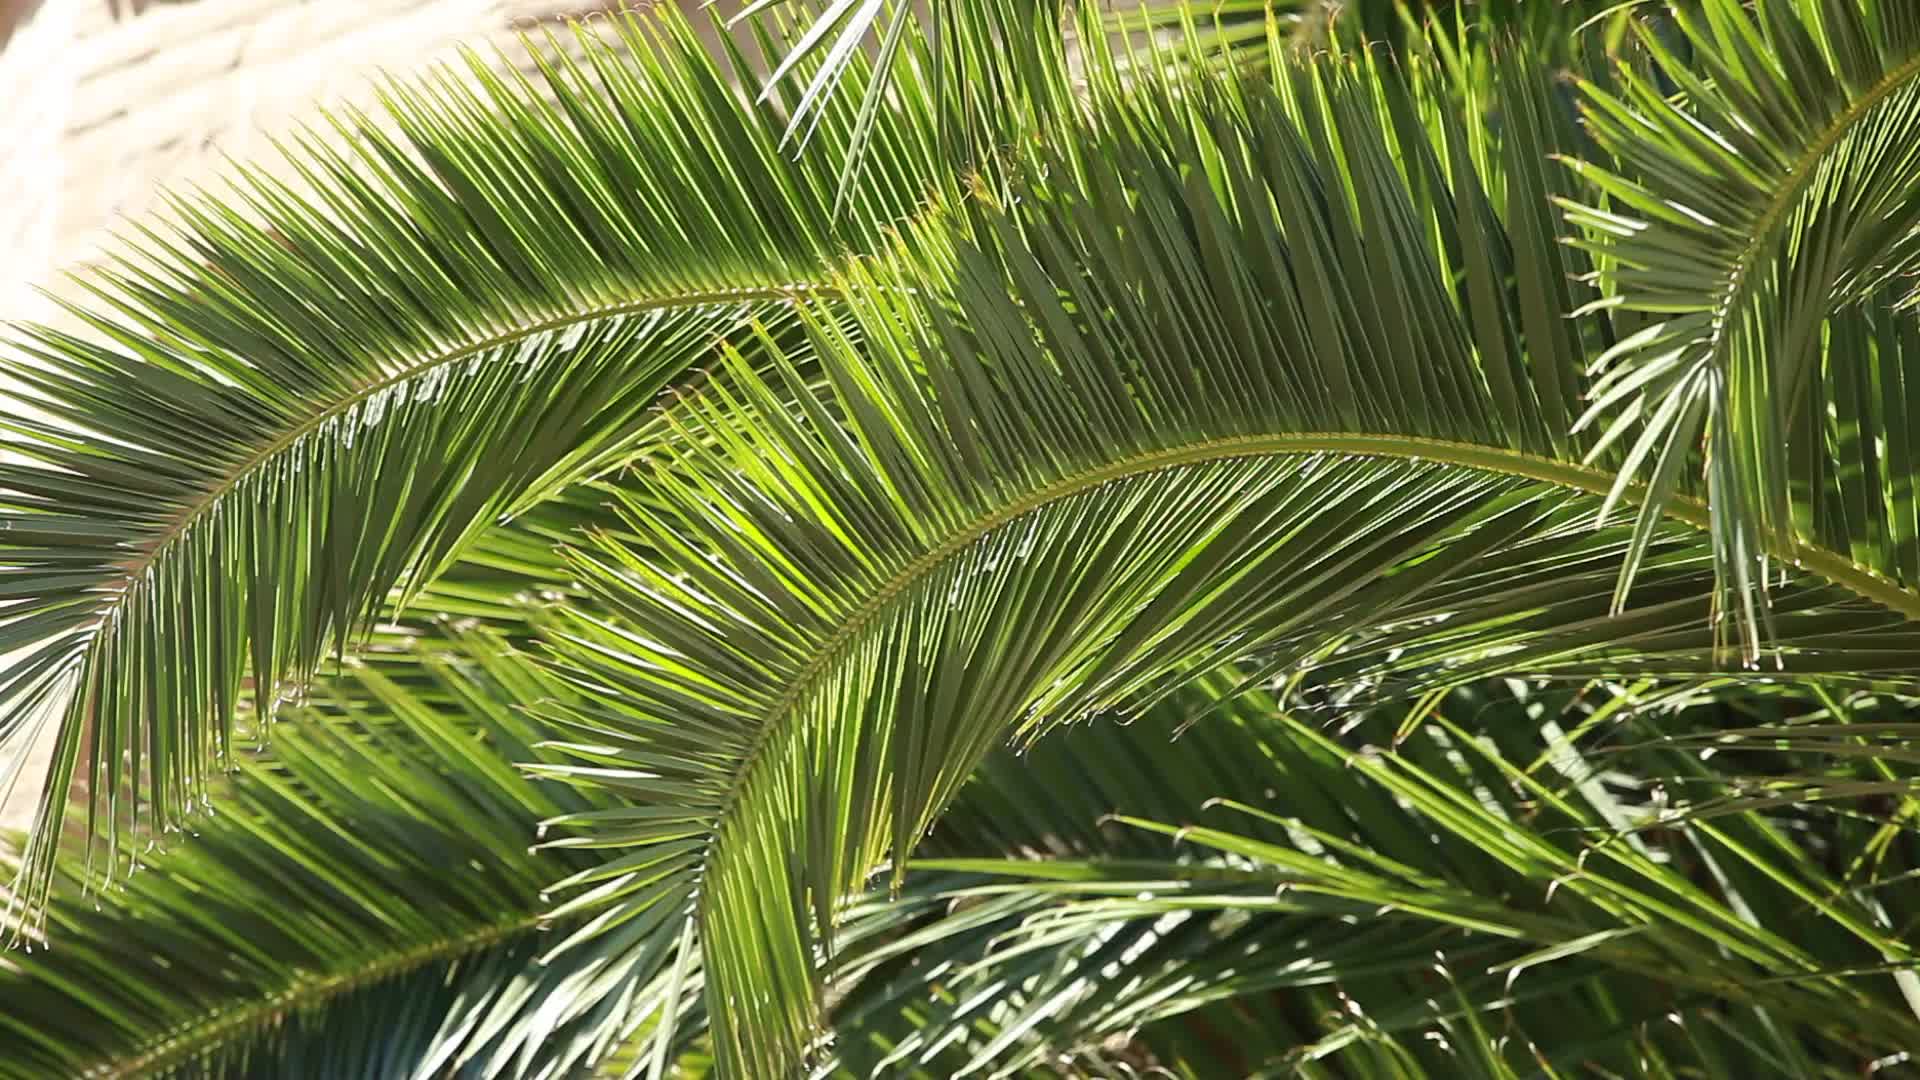 Video: Green palm tree leaves in the wind and architectural